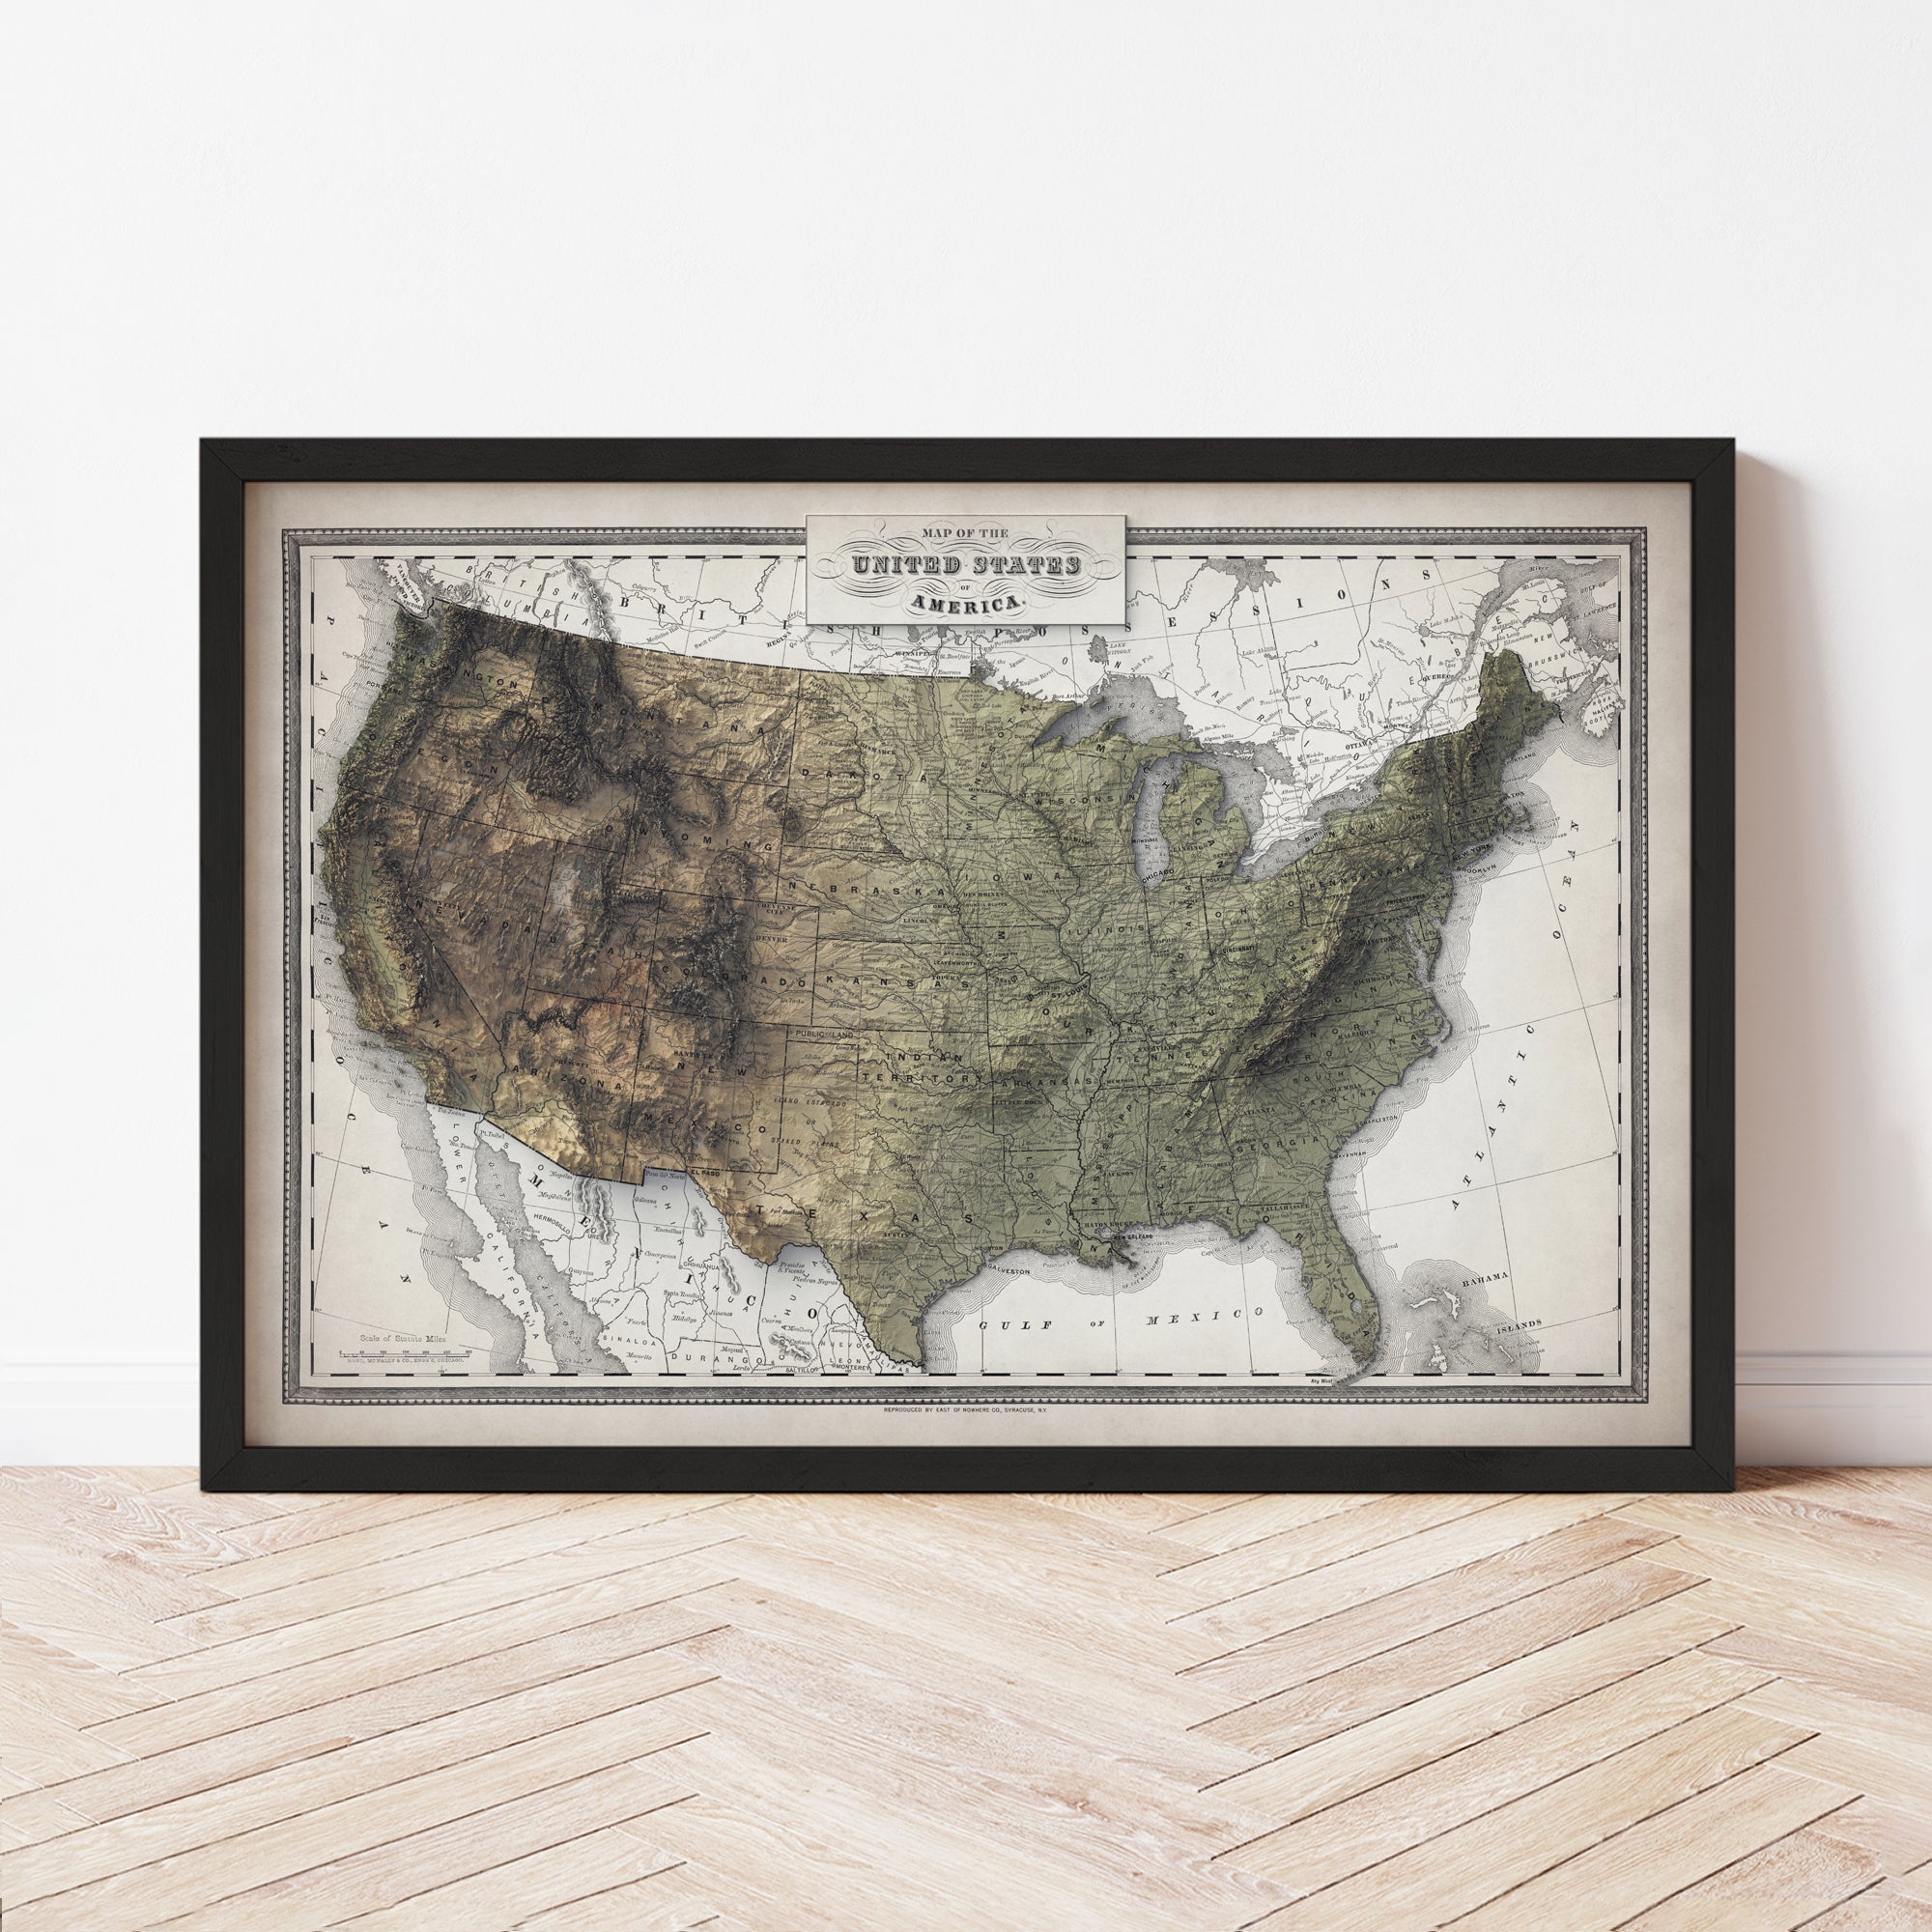 United States - Vintage Shaded Relief Map (1888)